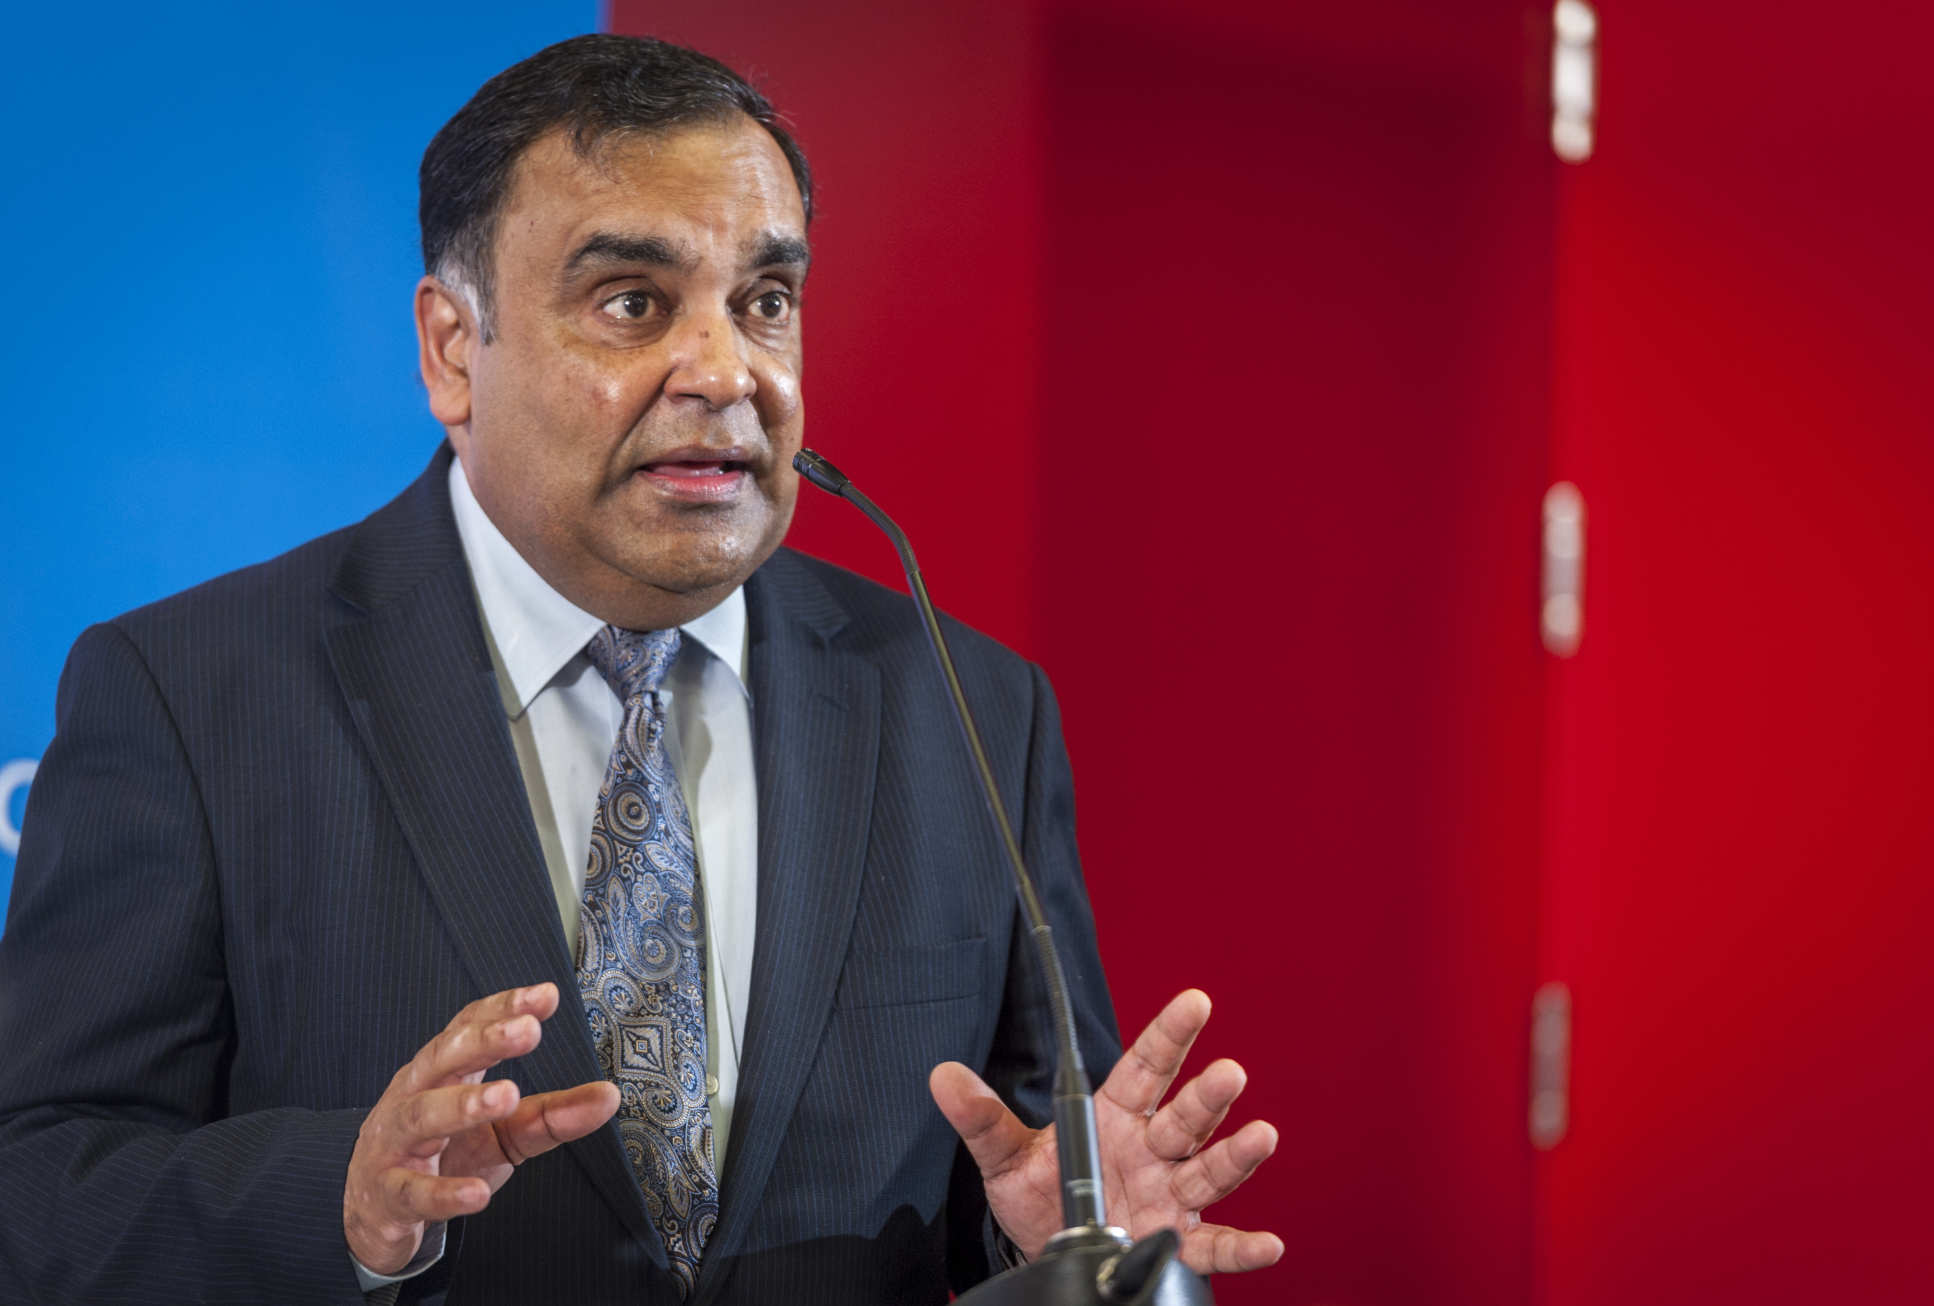 YK Sinha, India’s High Commissioner to the UK